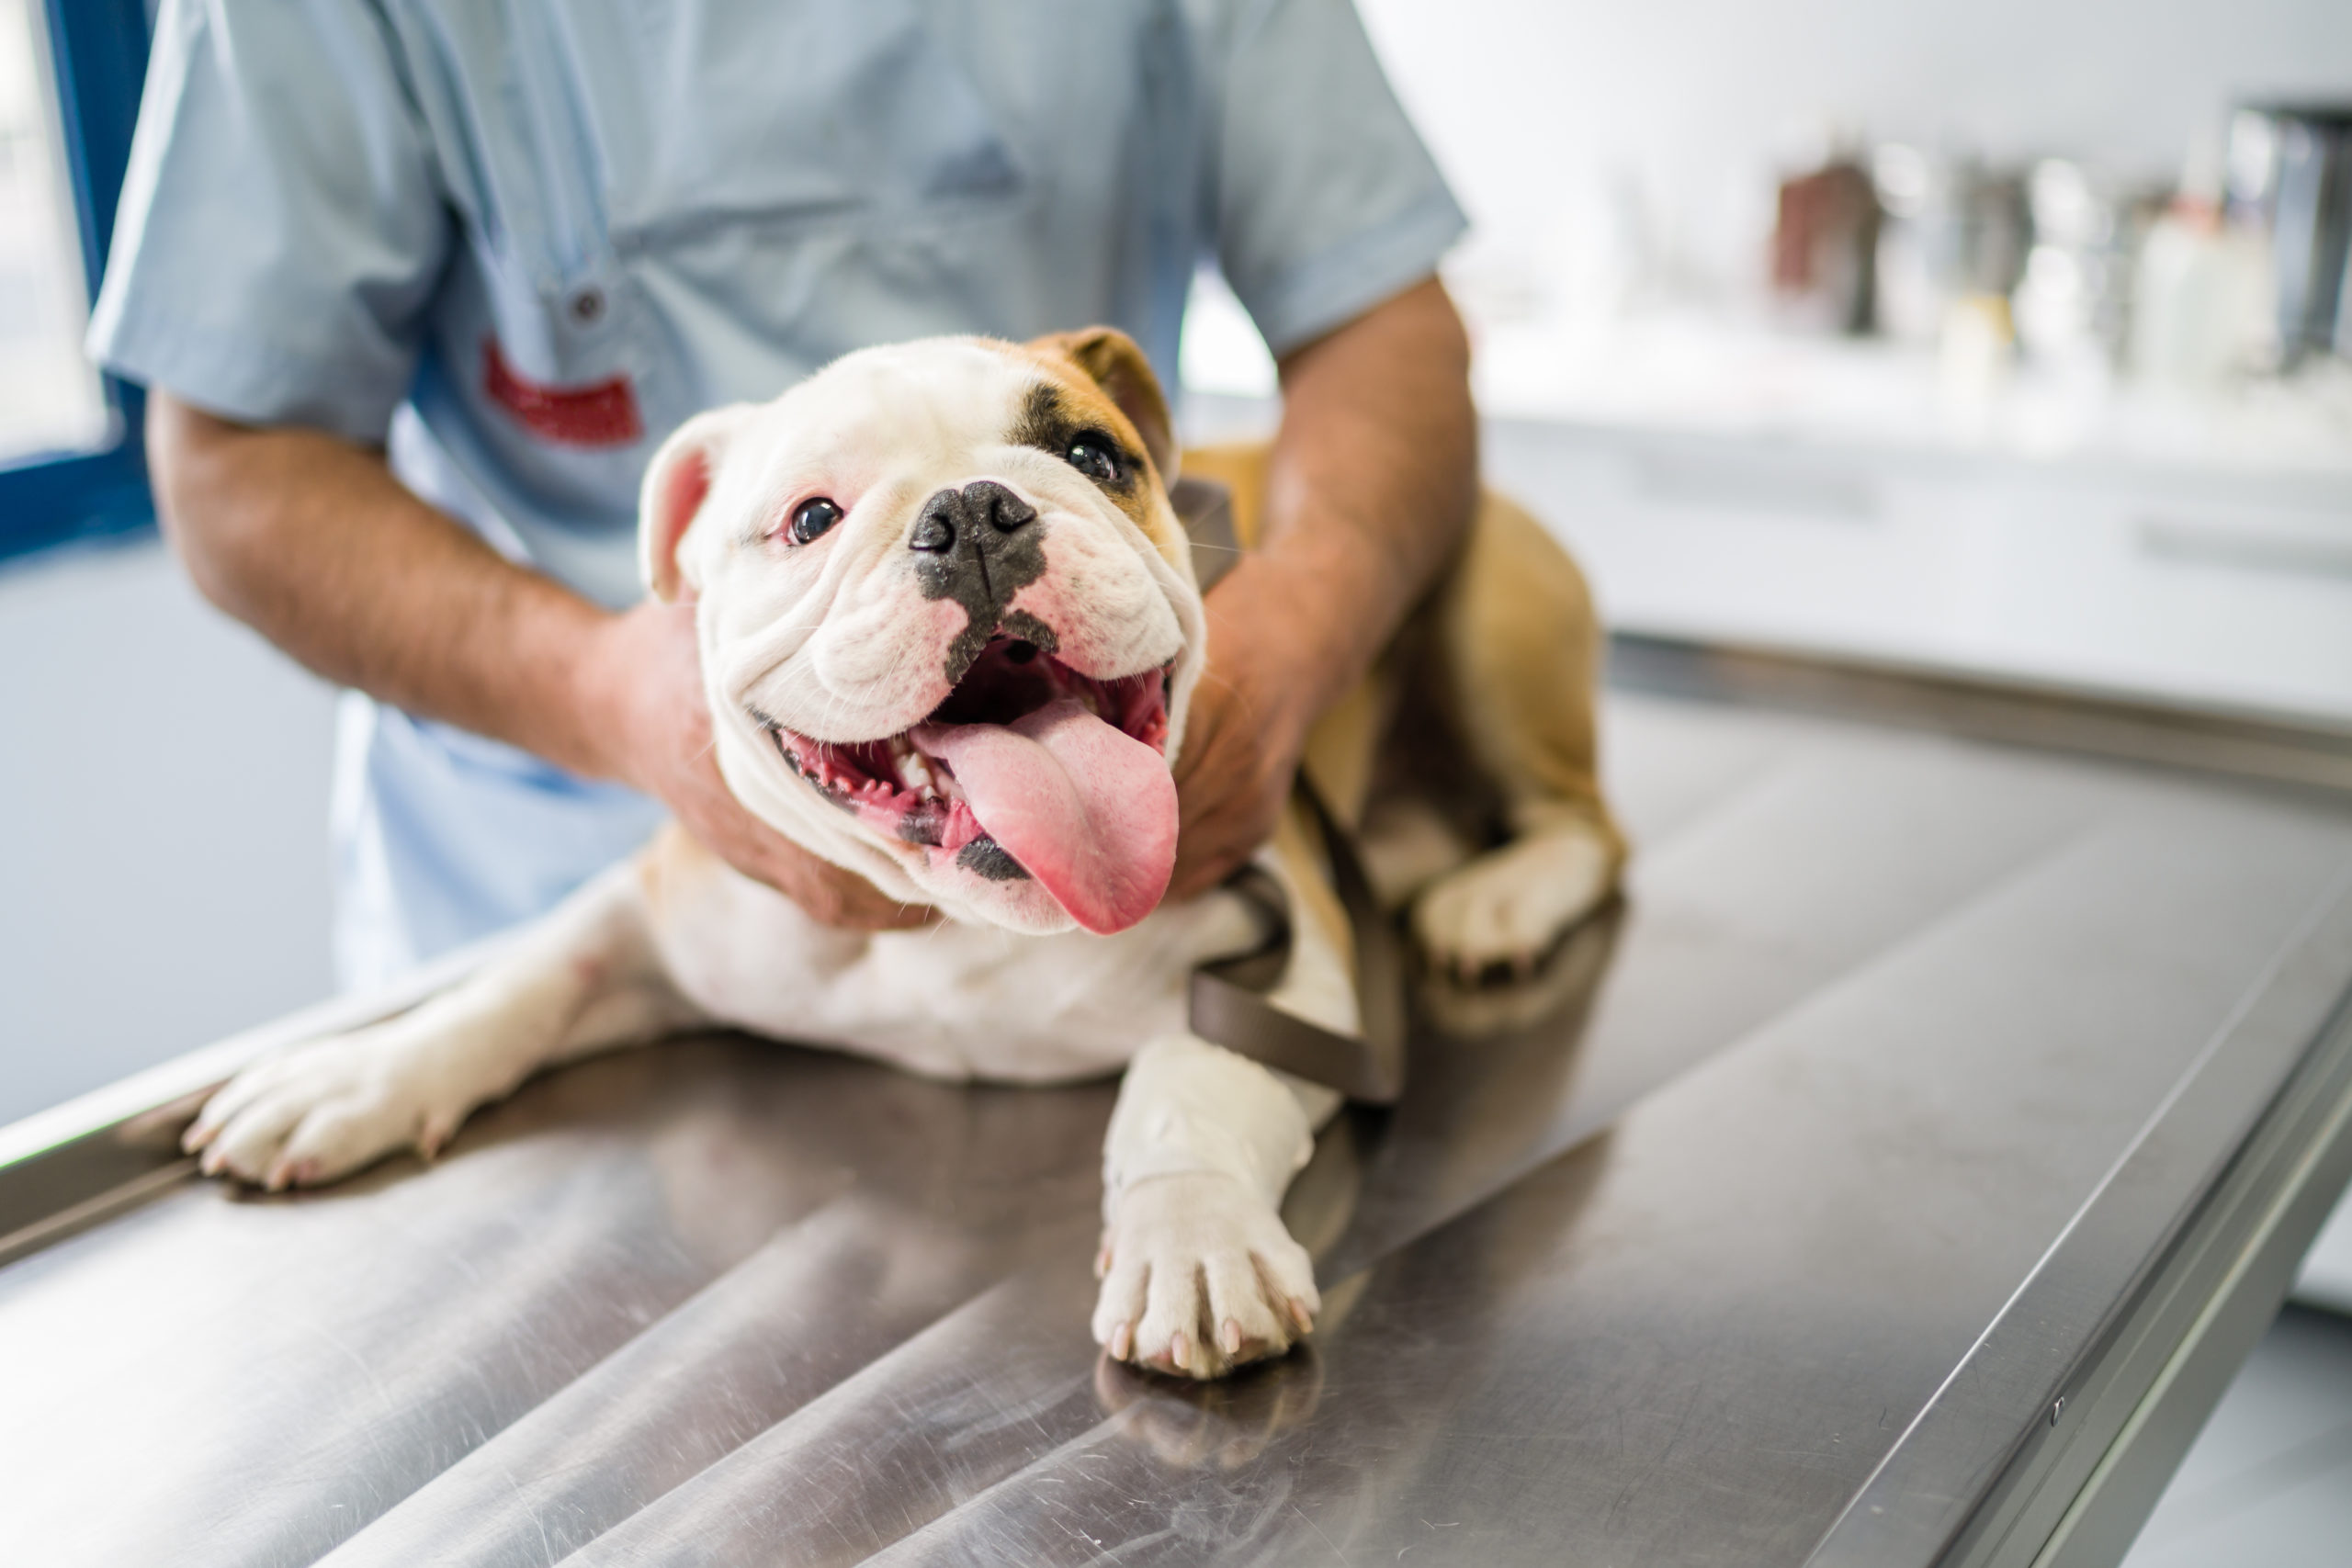 Cute dog on operating table in hands of vet